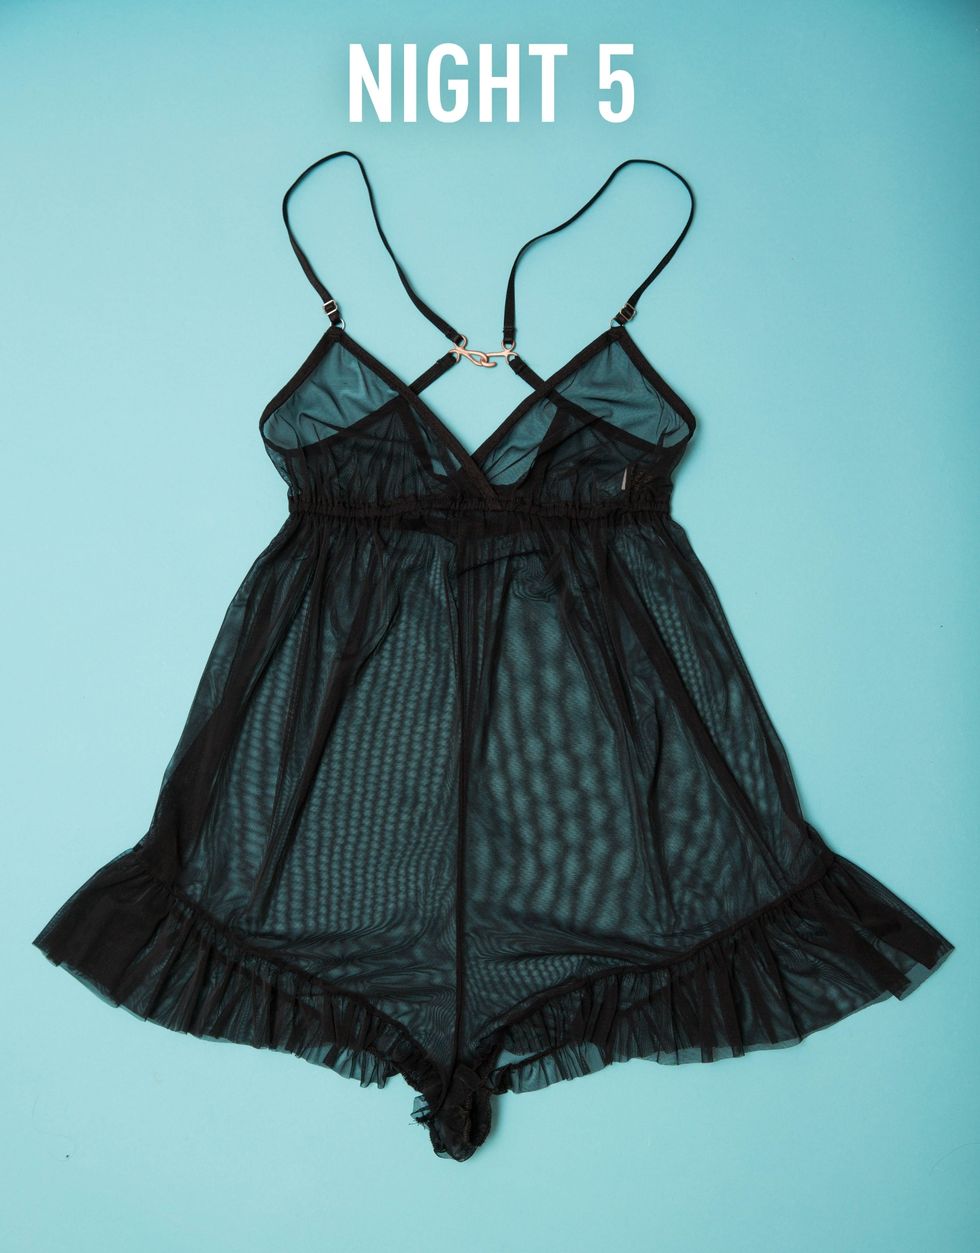 I wore lingerie to bed for seven nights - night five